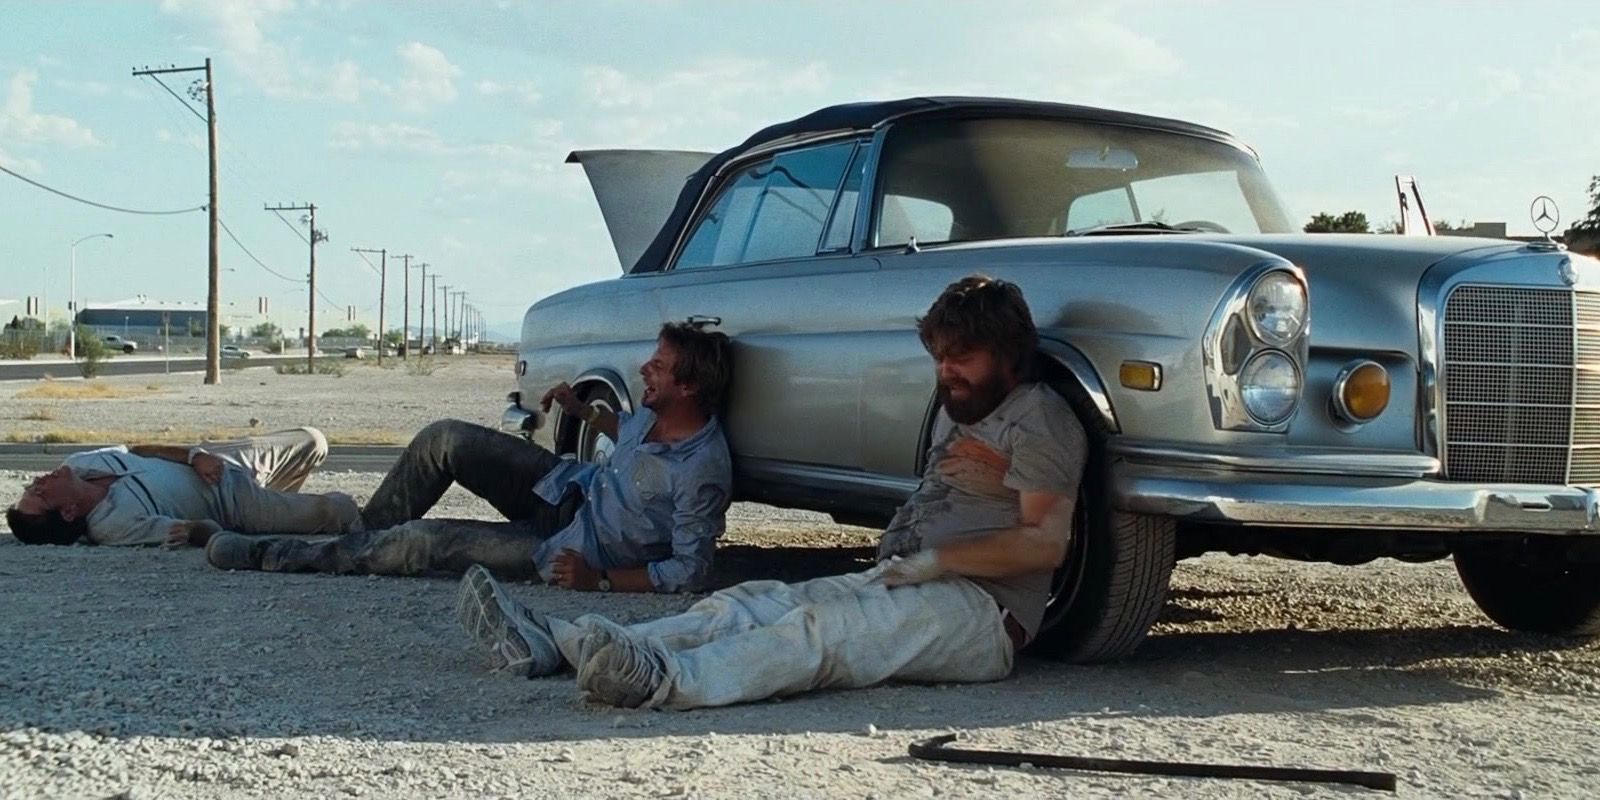 Ed Helms, Bradley Cooper and Zach Galifianakis in The Hangover